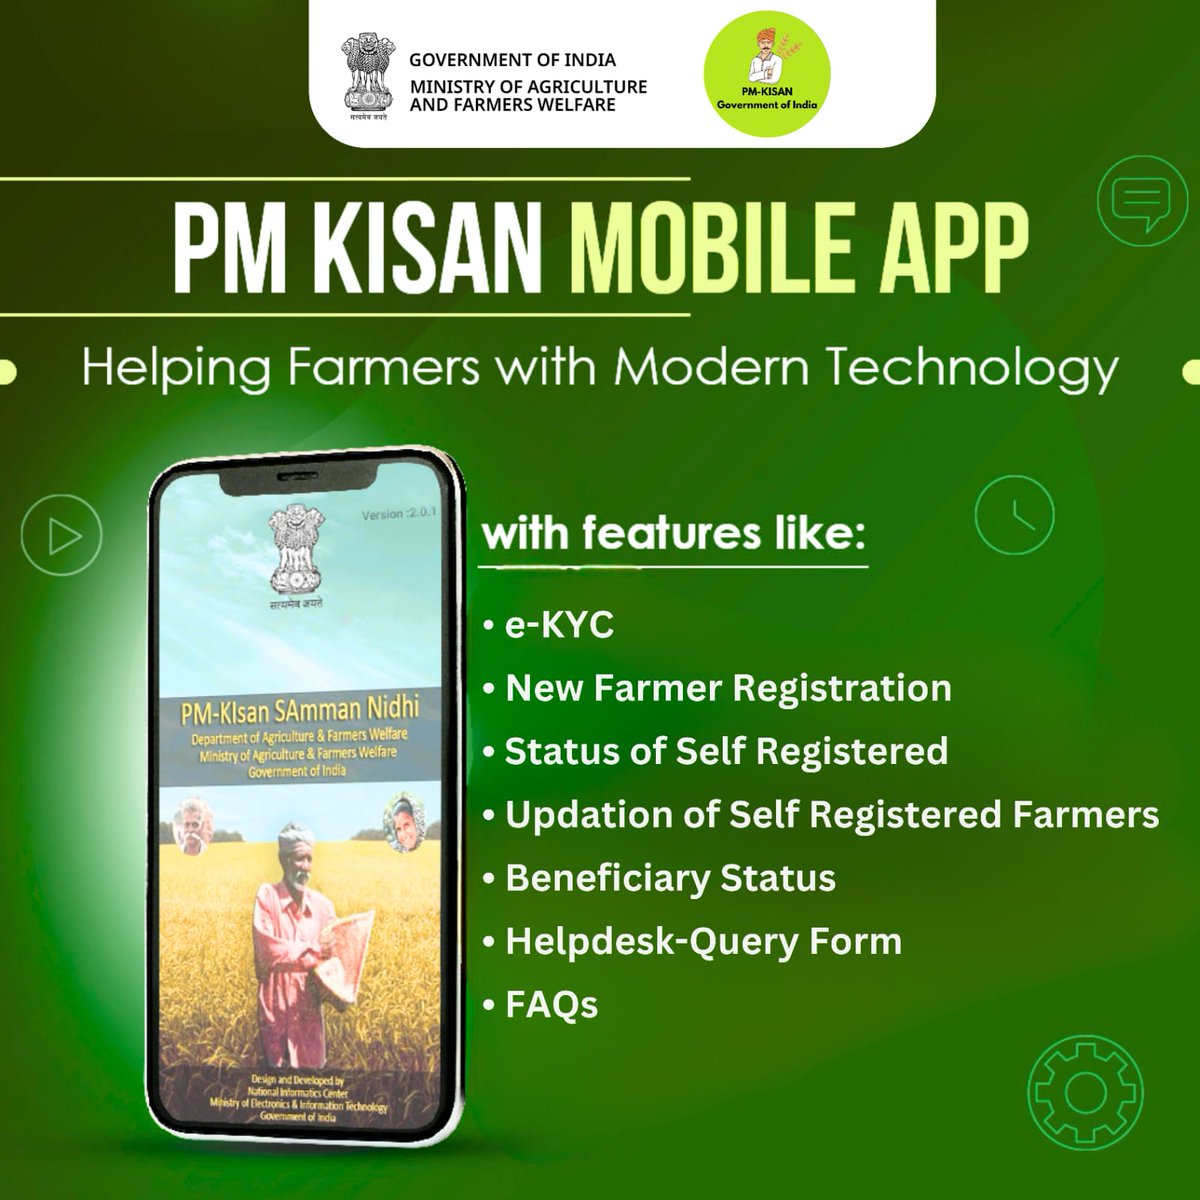 Digital farmer, Digital India! . Download the PM Kisan mobile app and get your e-KYC done for PM Kisan with multiple hassle free modes provided. #PMKisan #PMKisanSammanNidhi #PMKisanMobileApp #Farmers